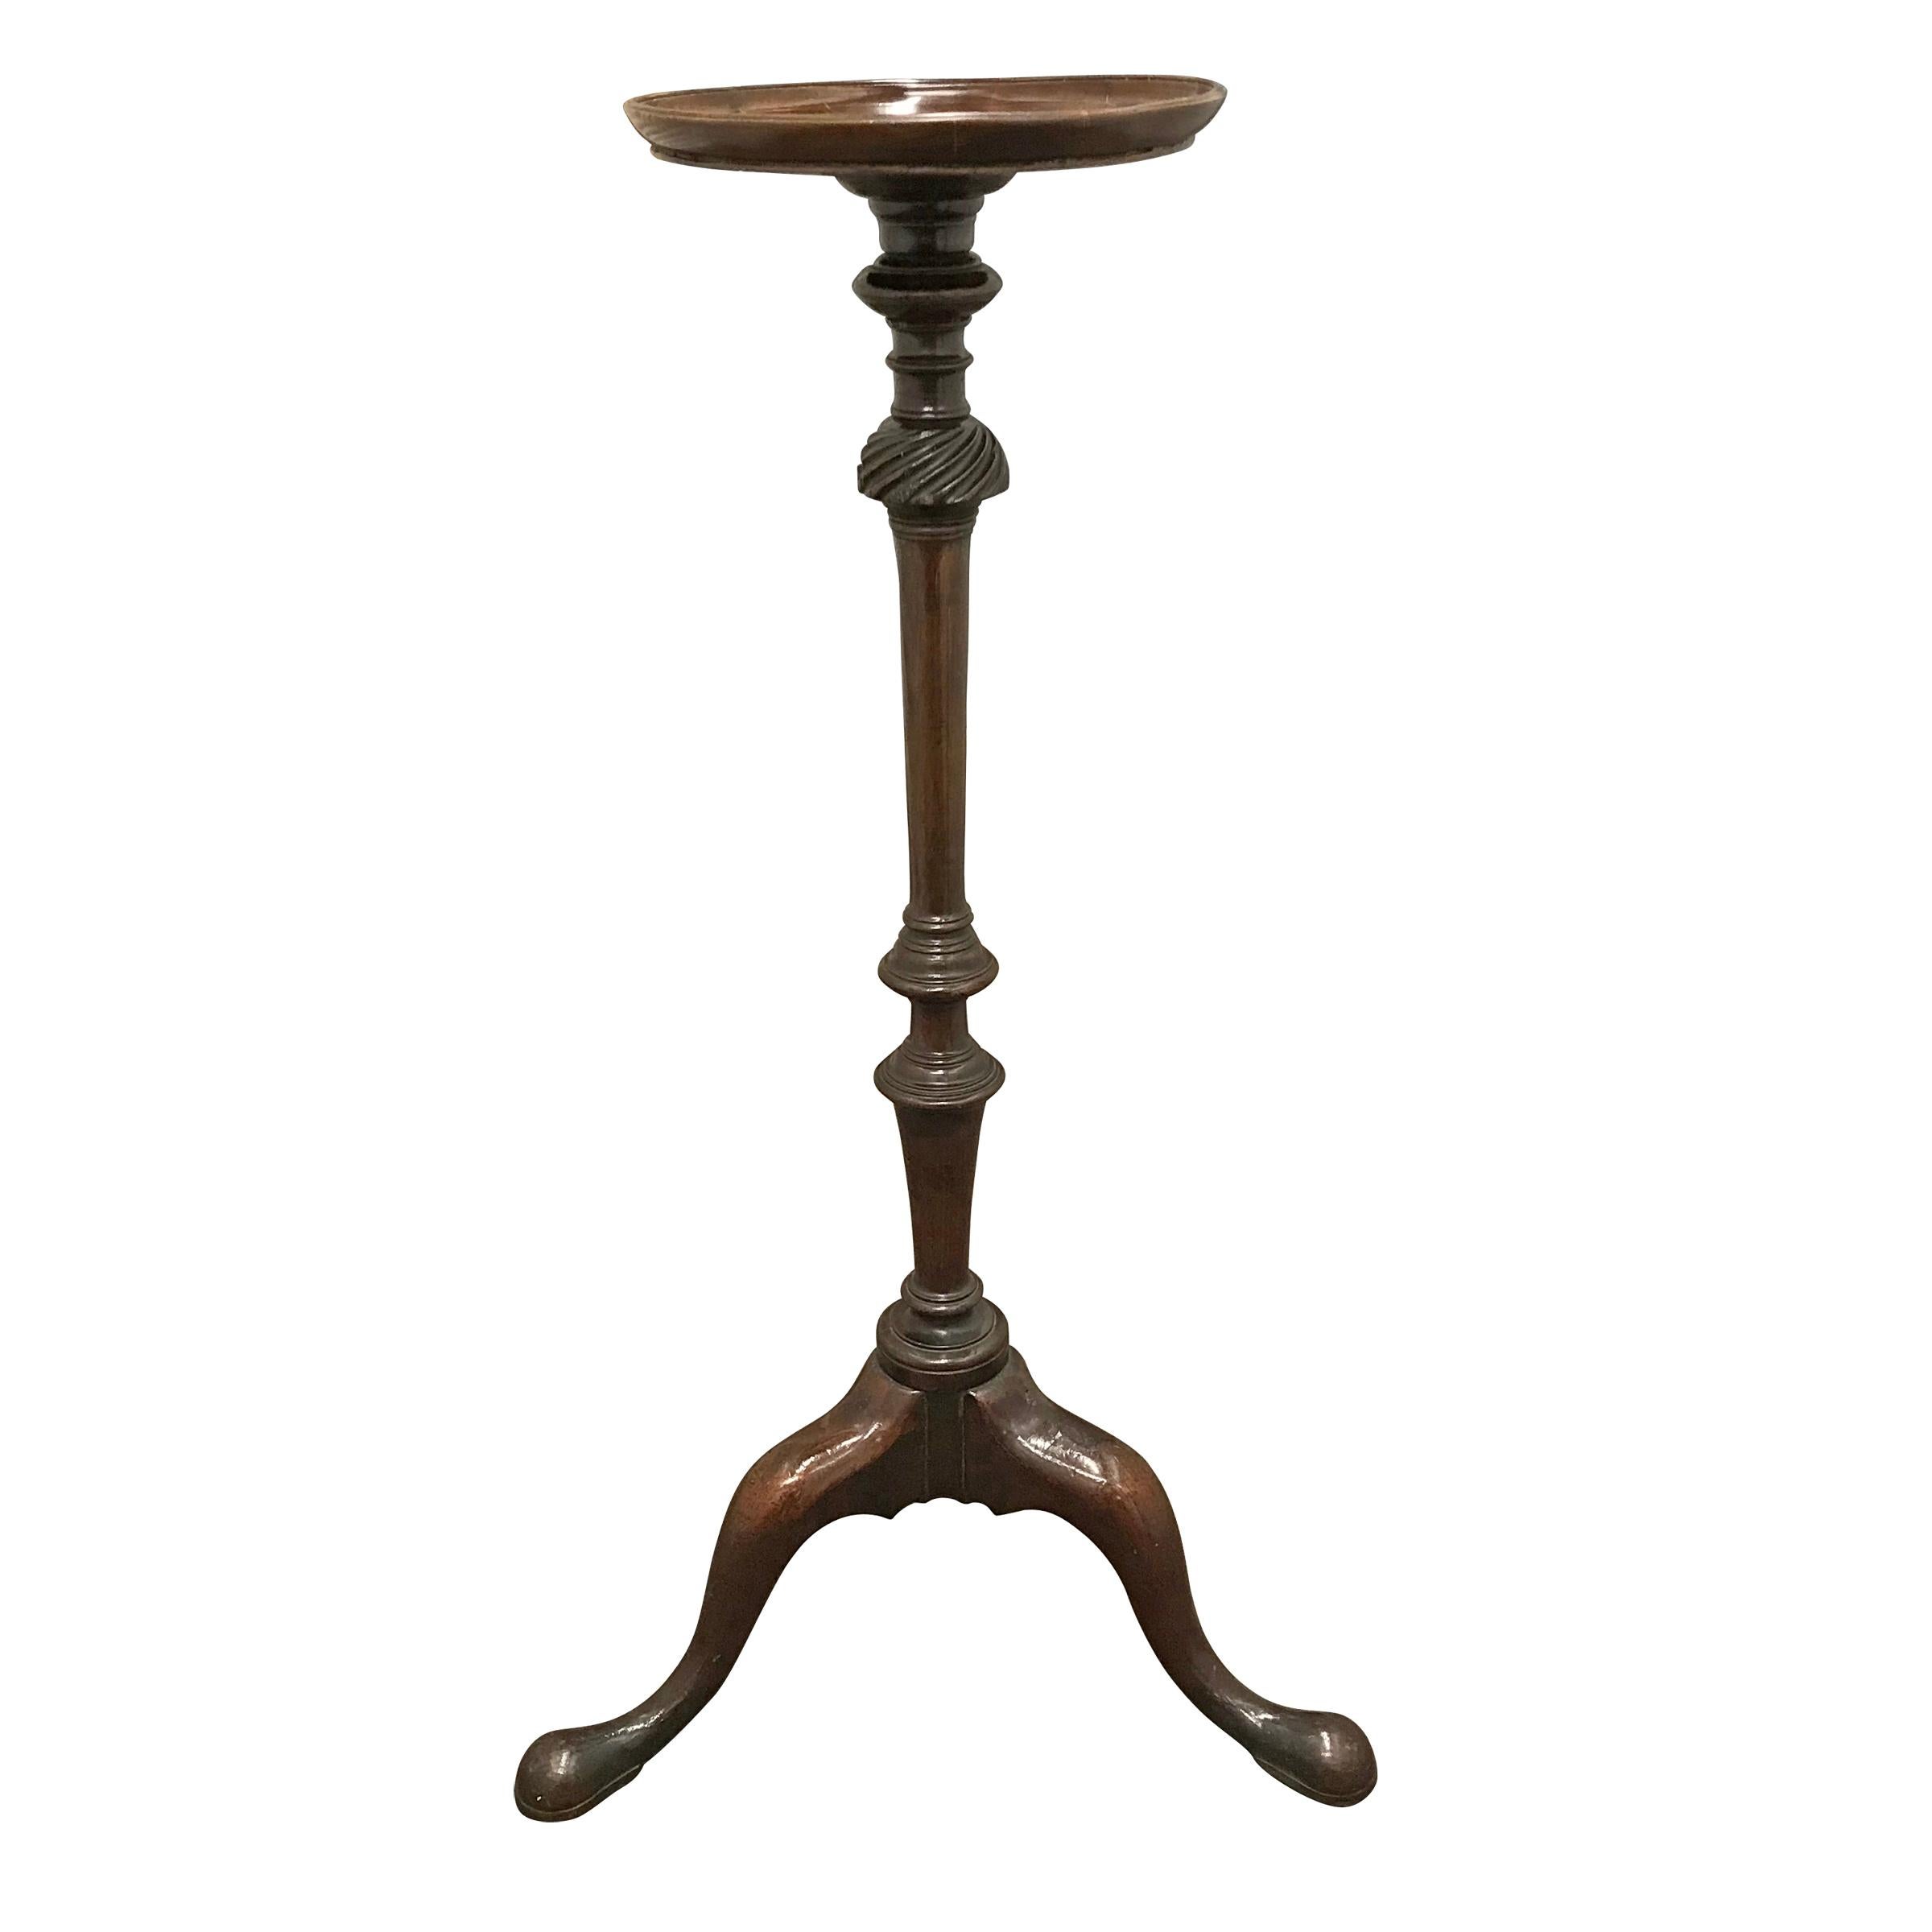 18th Century American Candle Stand